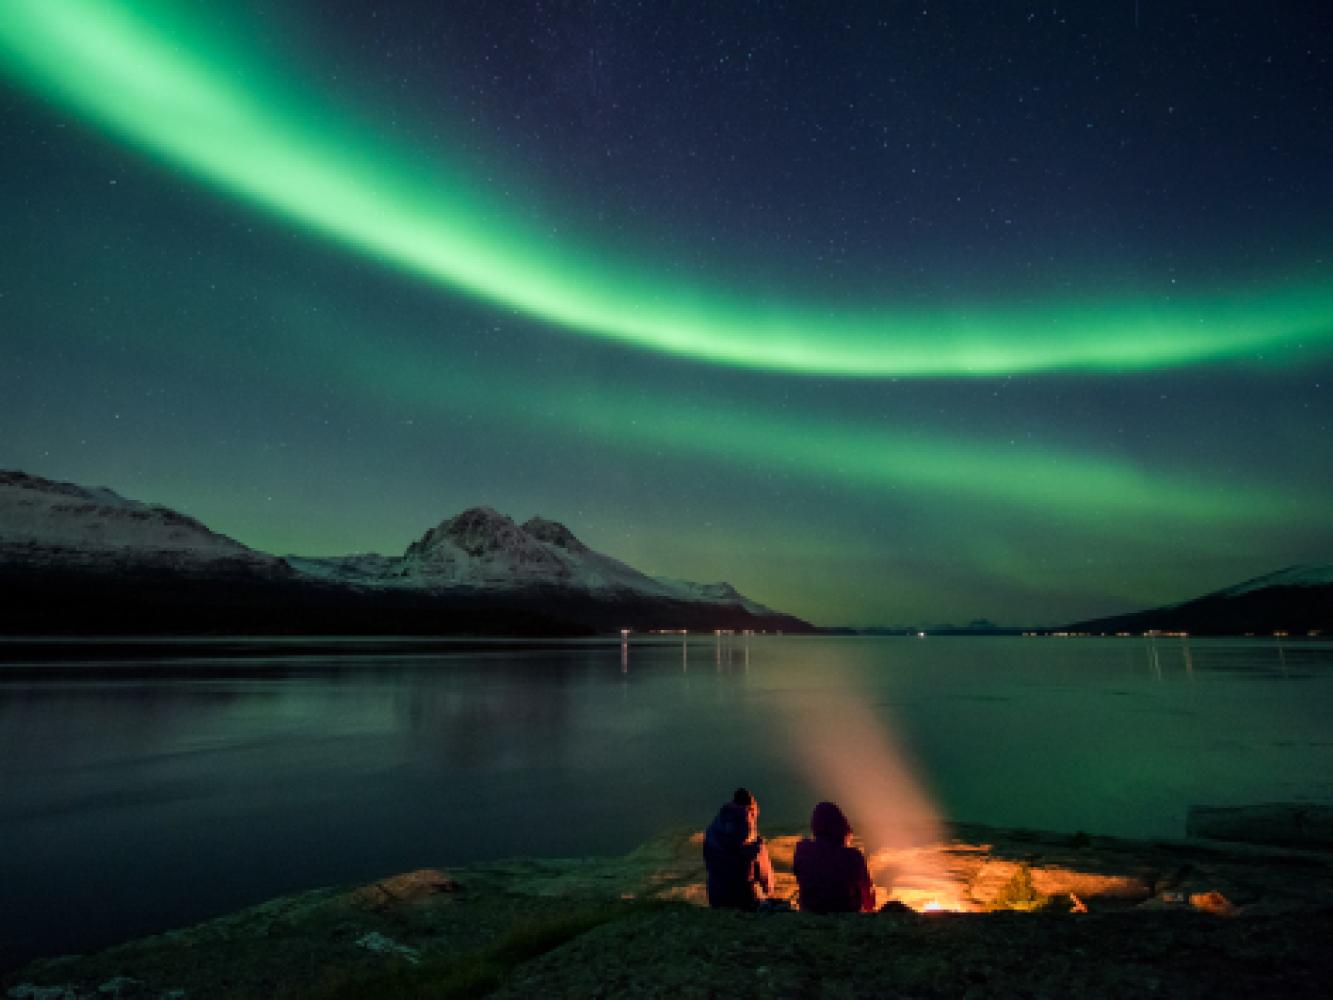 Northern lights in the Tromso region, Northern Norway